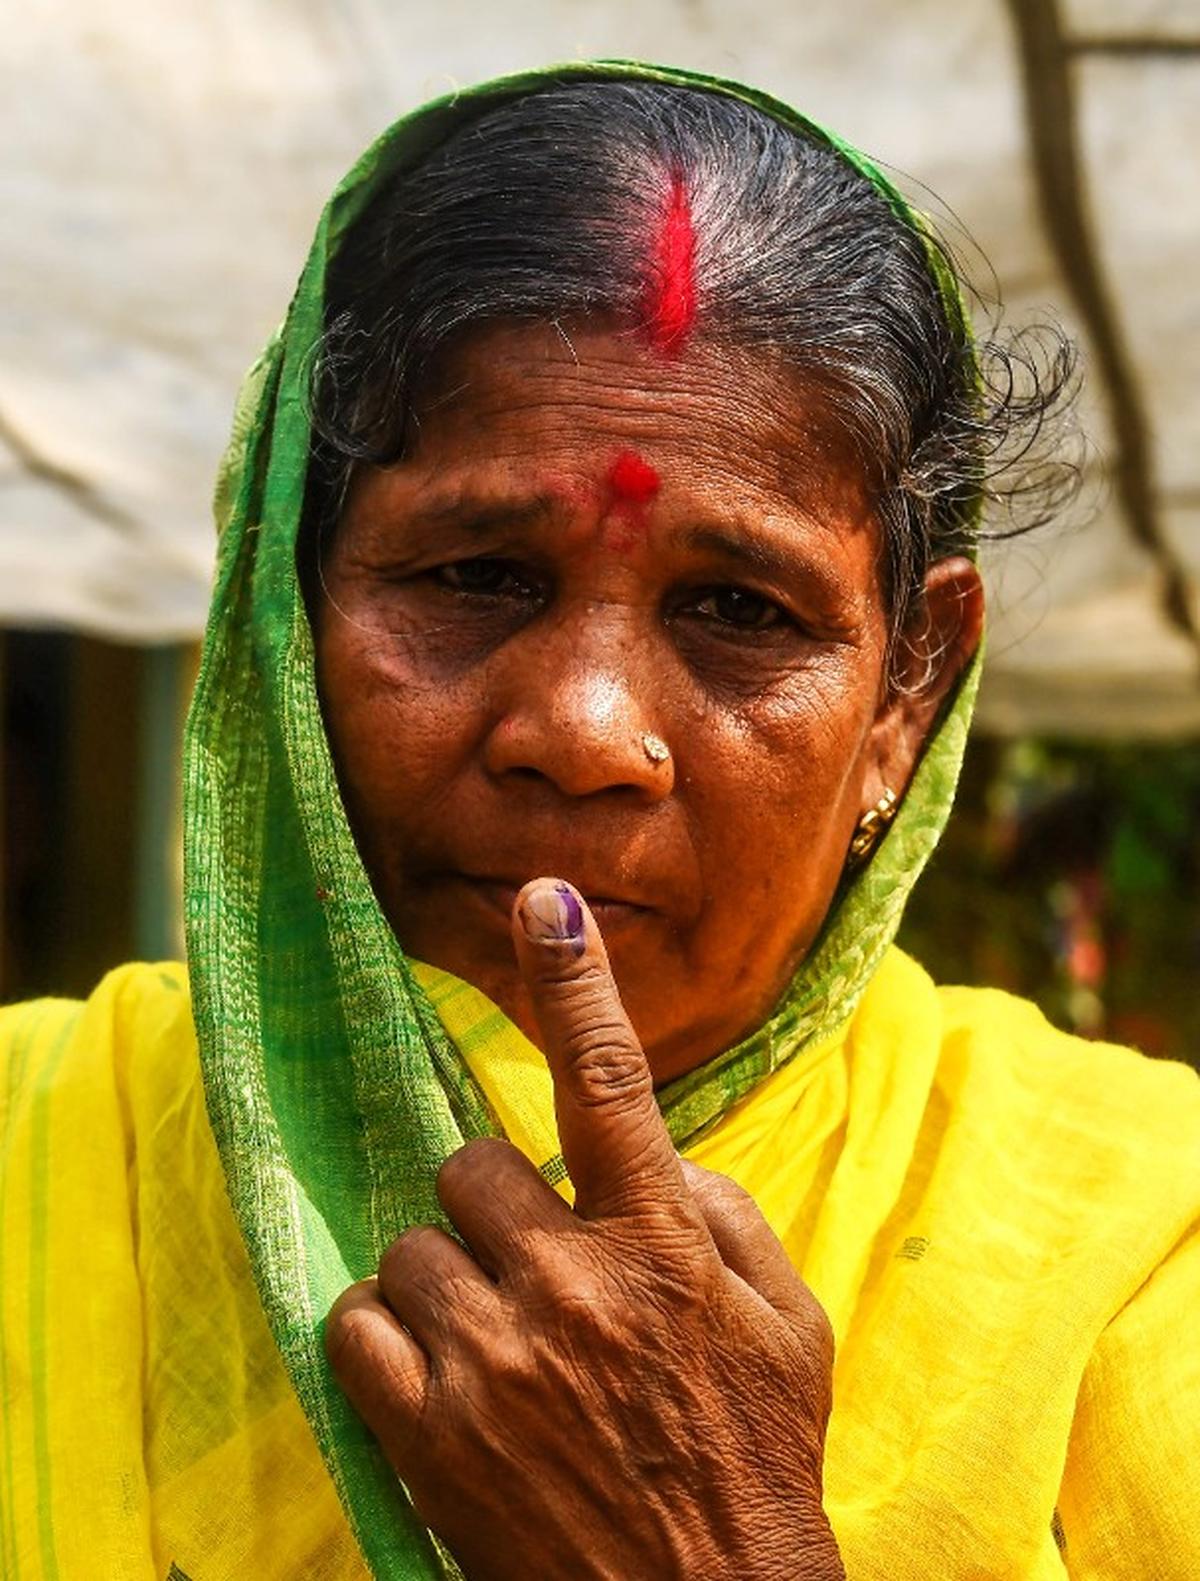 Watch | What are India’s worries over foreign interference in elections?